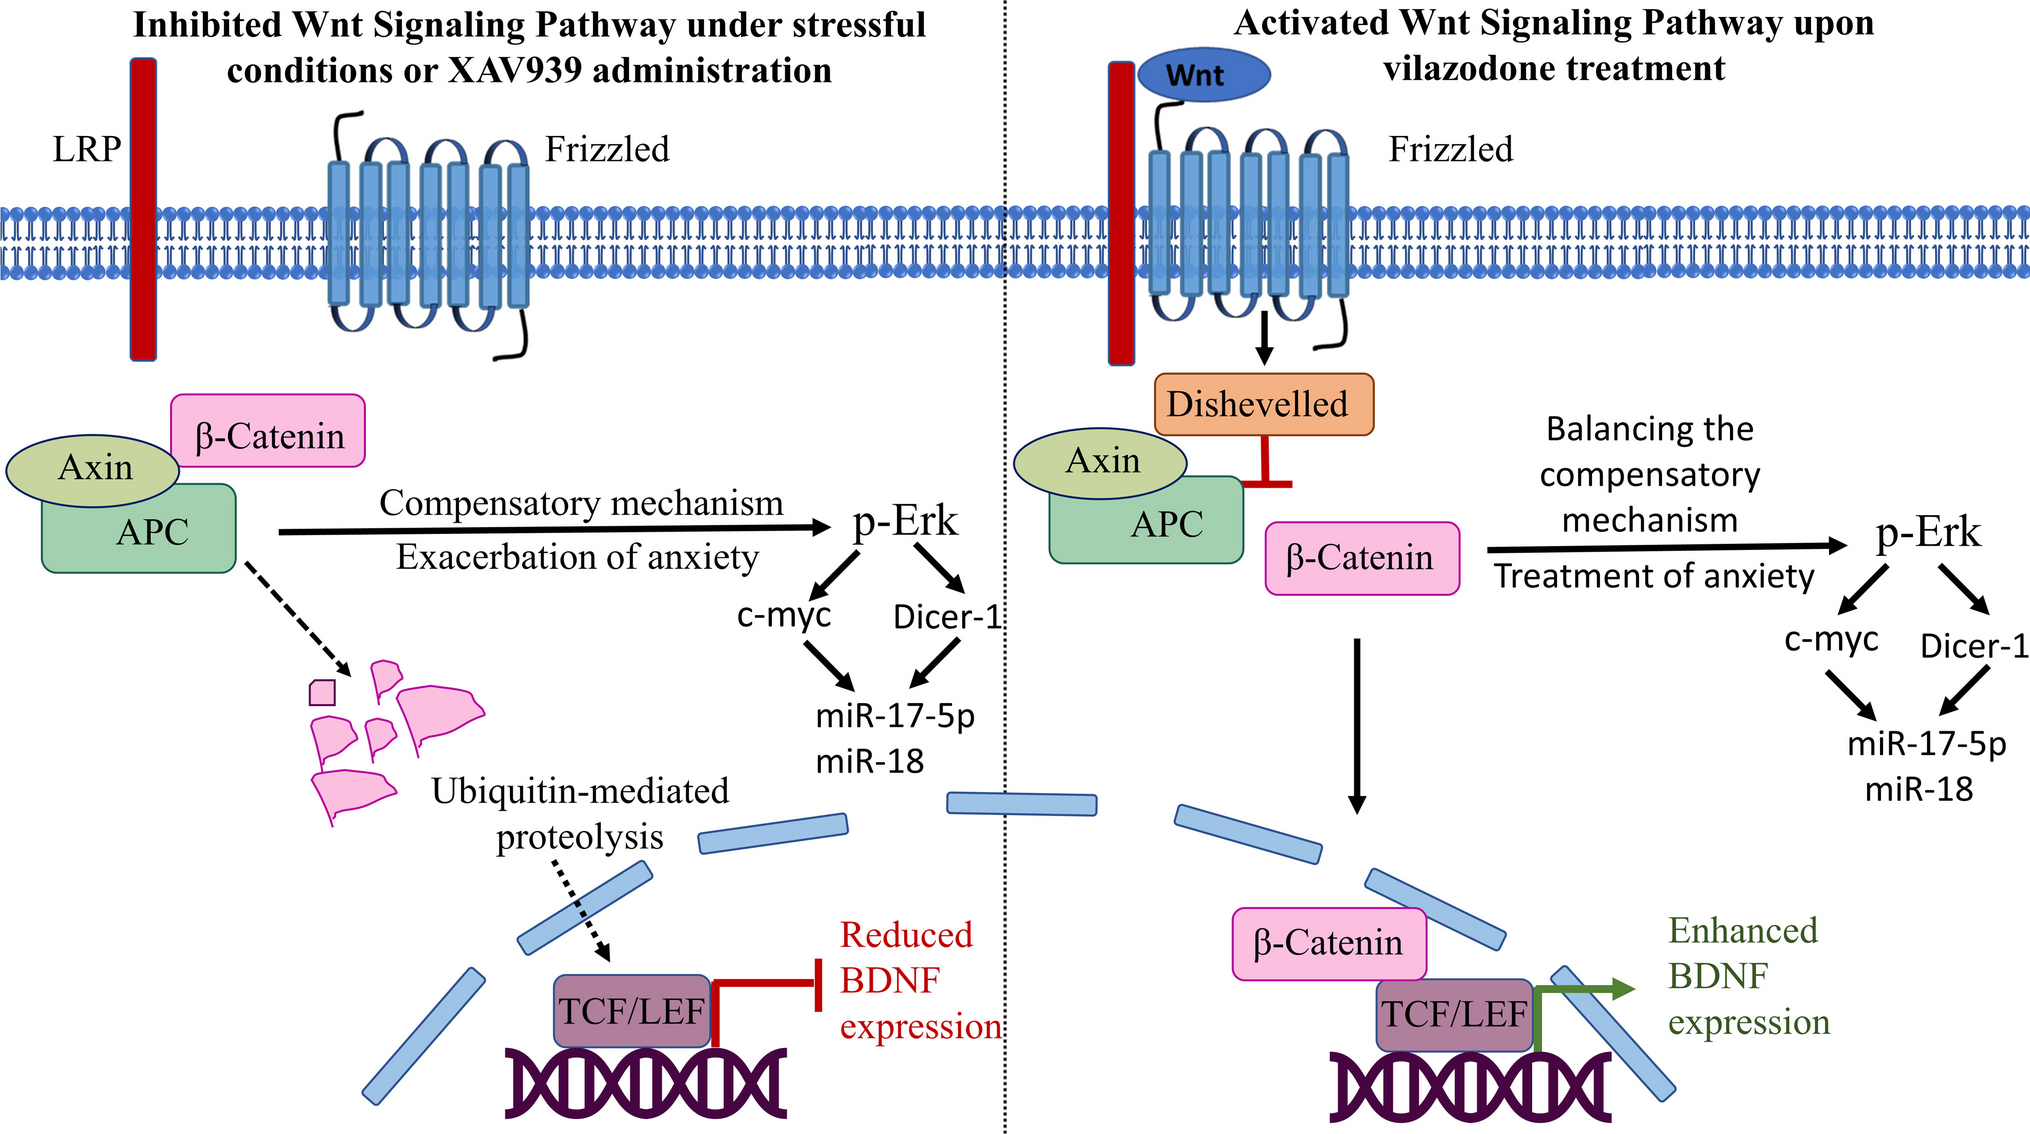 Vilazodone Alleviates Neurogenesis-Induced Anxiety in the Chronic Unpredictable Mild Stress Female Rat Model: Role of Wnt/β-Catenin Signaling